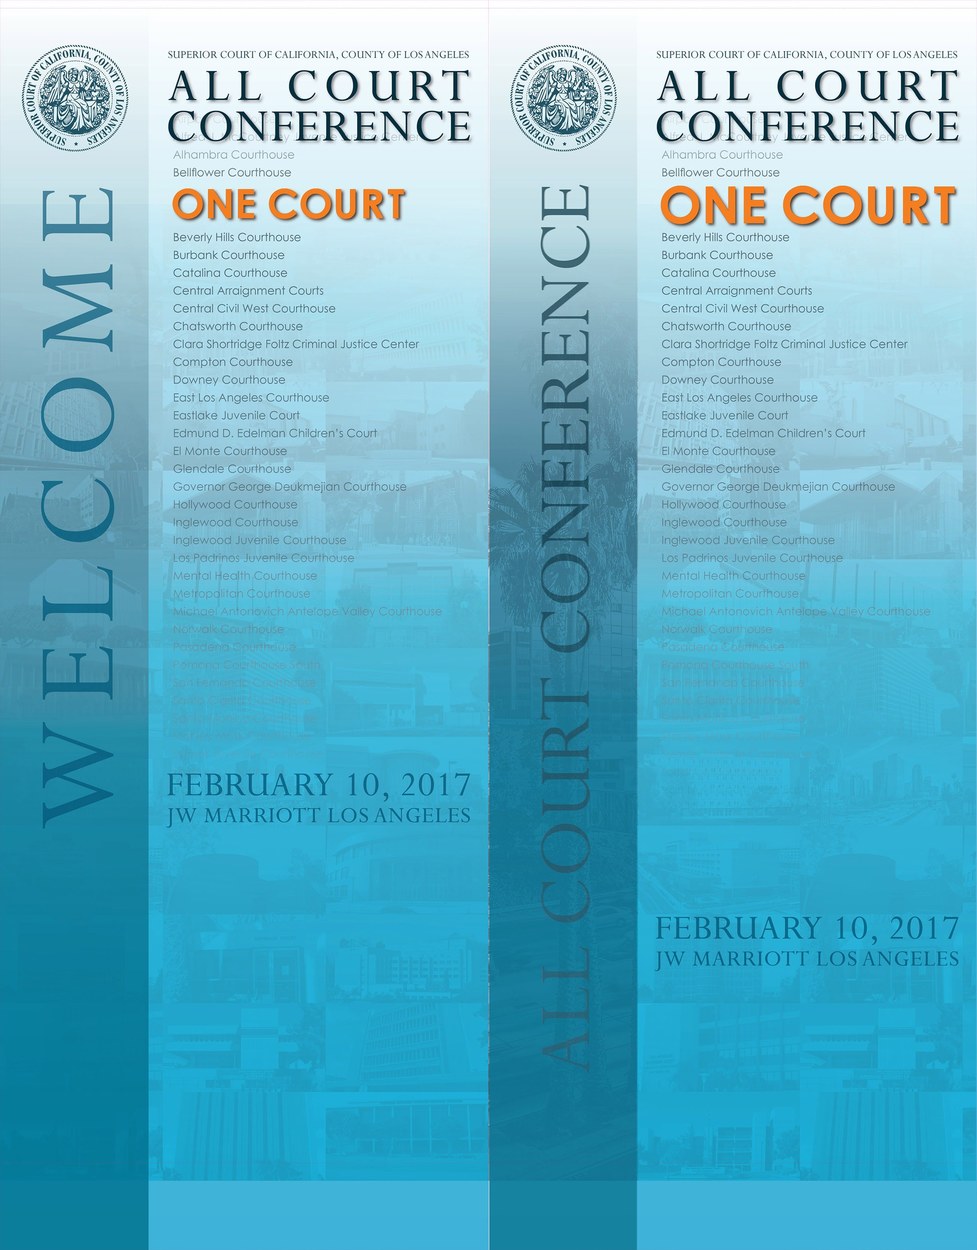 Los Angeles Superior Court - One Court Conference Banner Stands